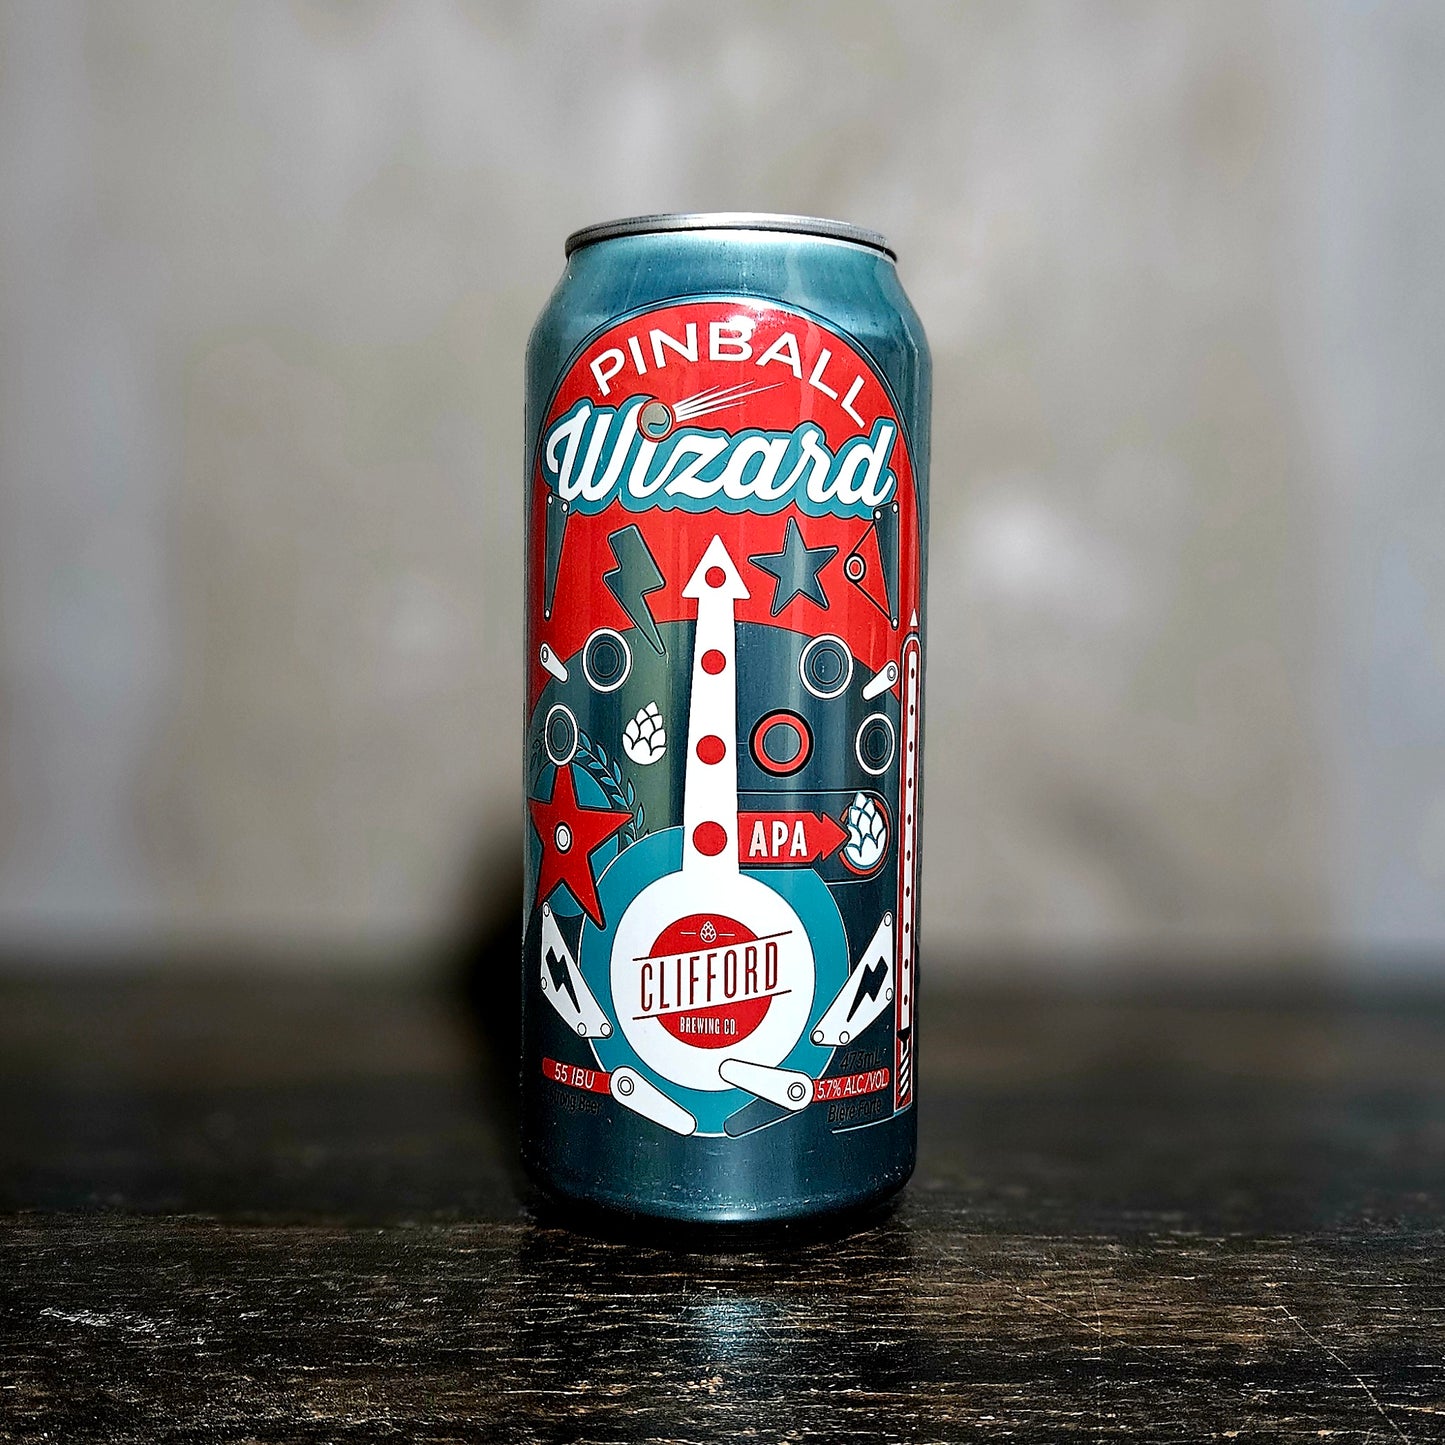 Clifford "Pinball Wizard" American Pale Ale